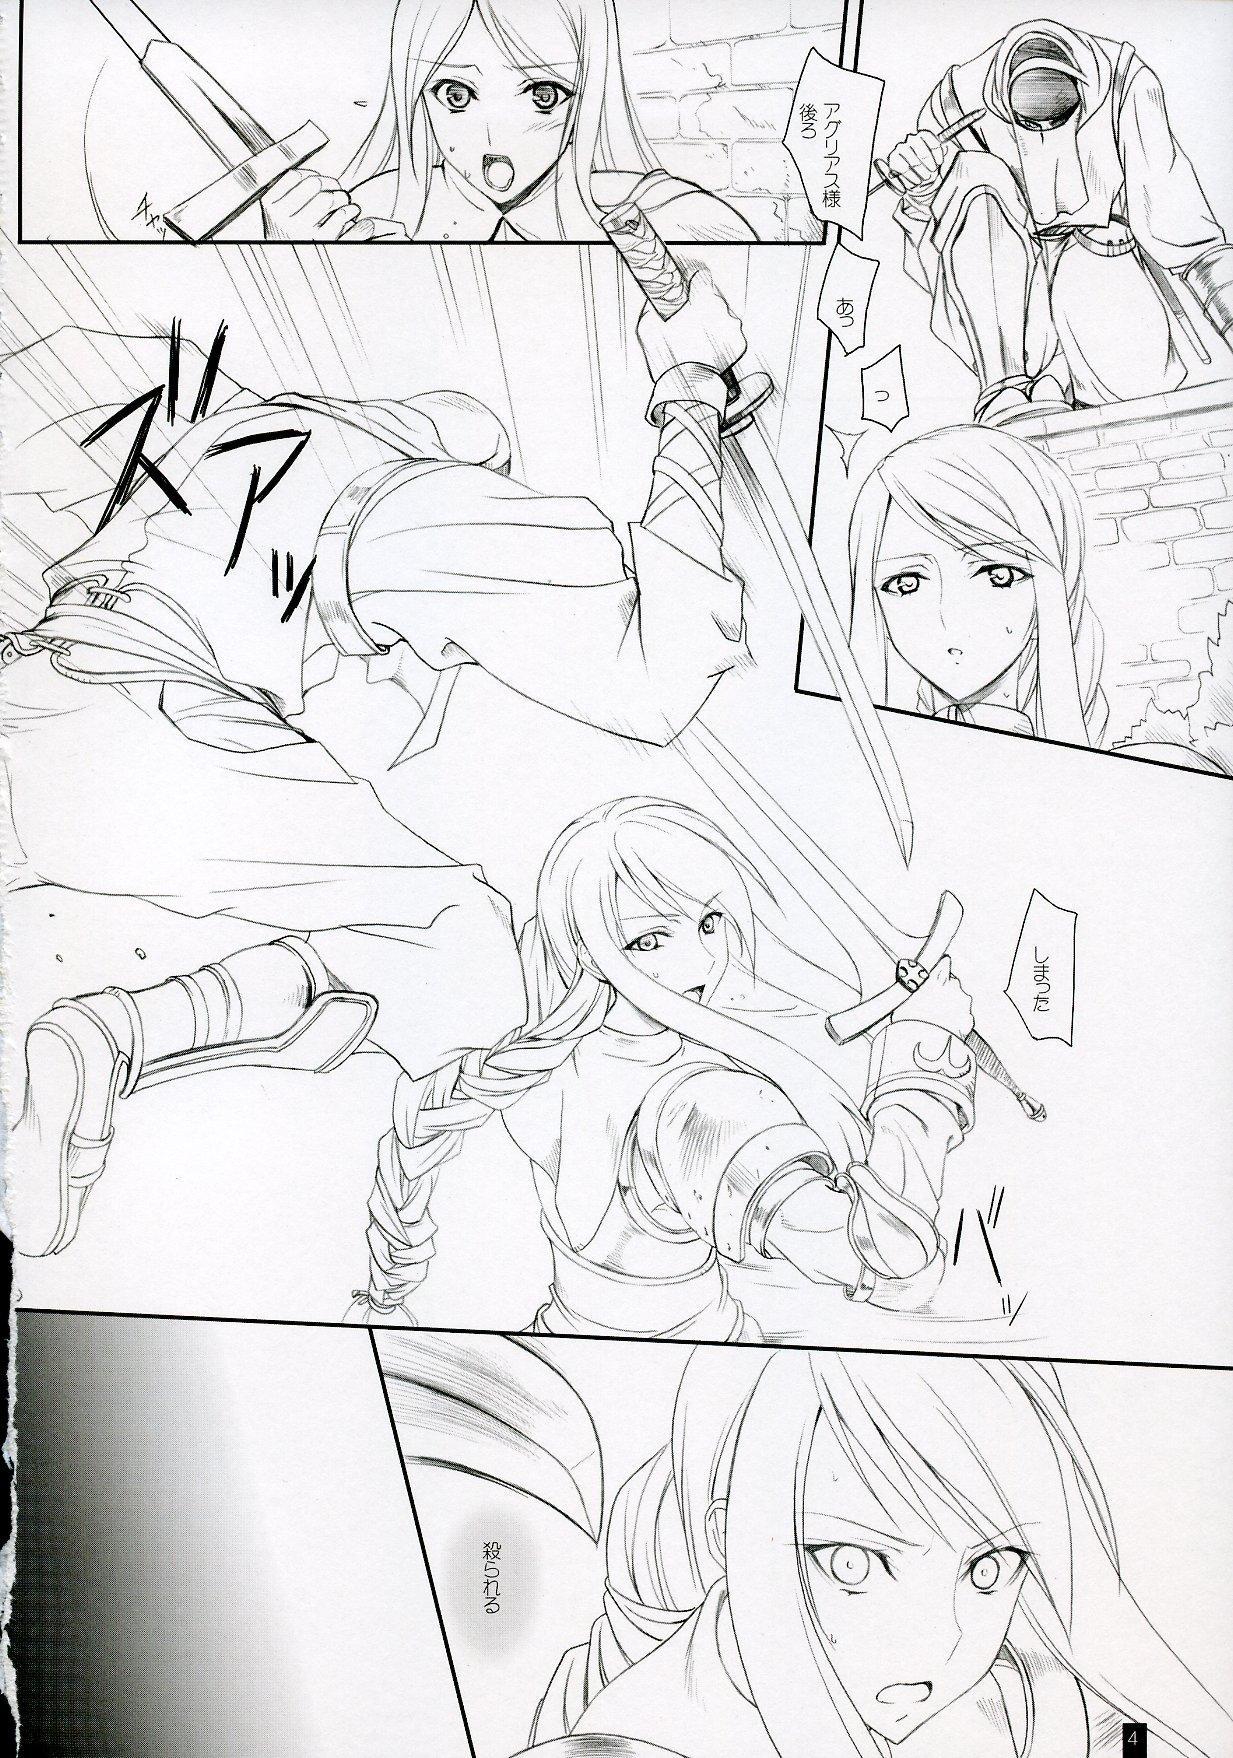 Anus Agrias-san to love love lesson - Final fantasy tactics Cocksucking - Page 3